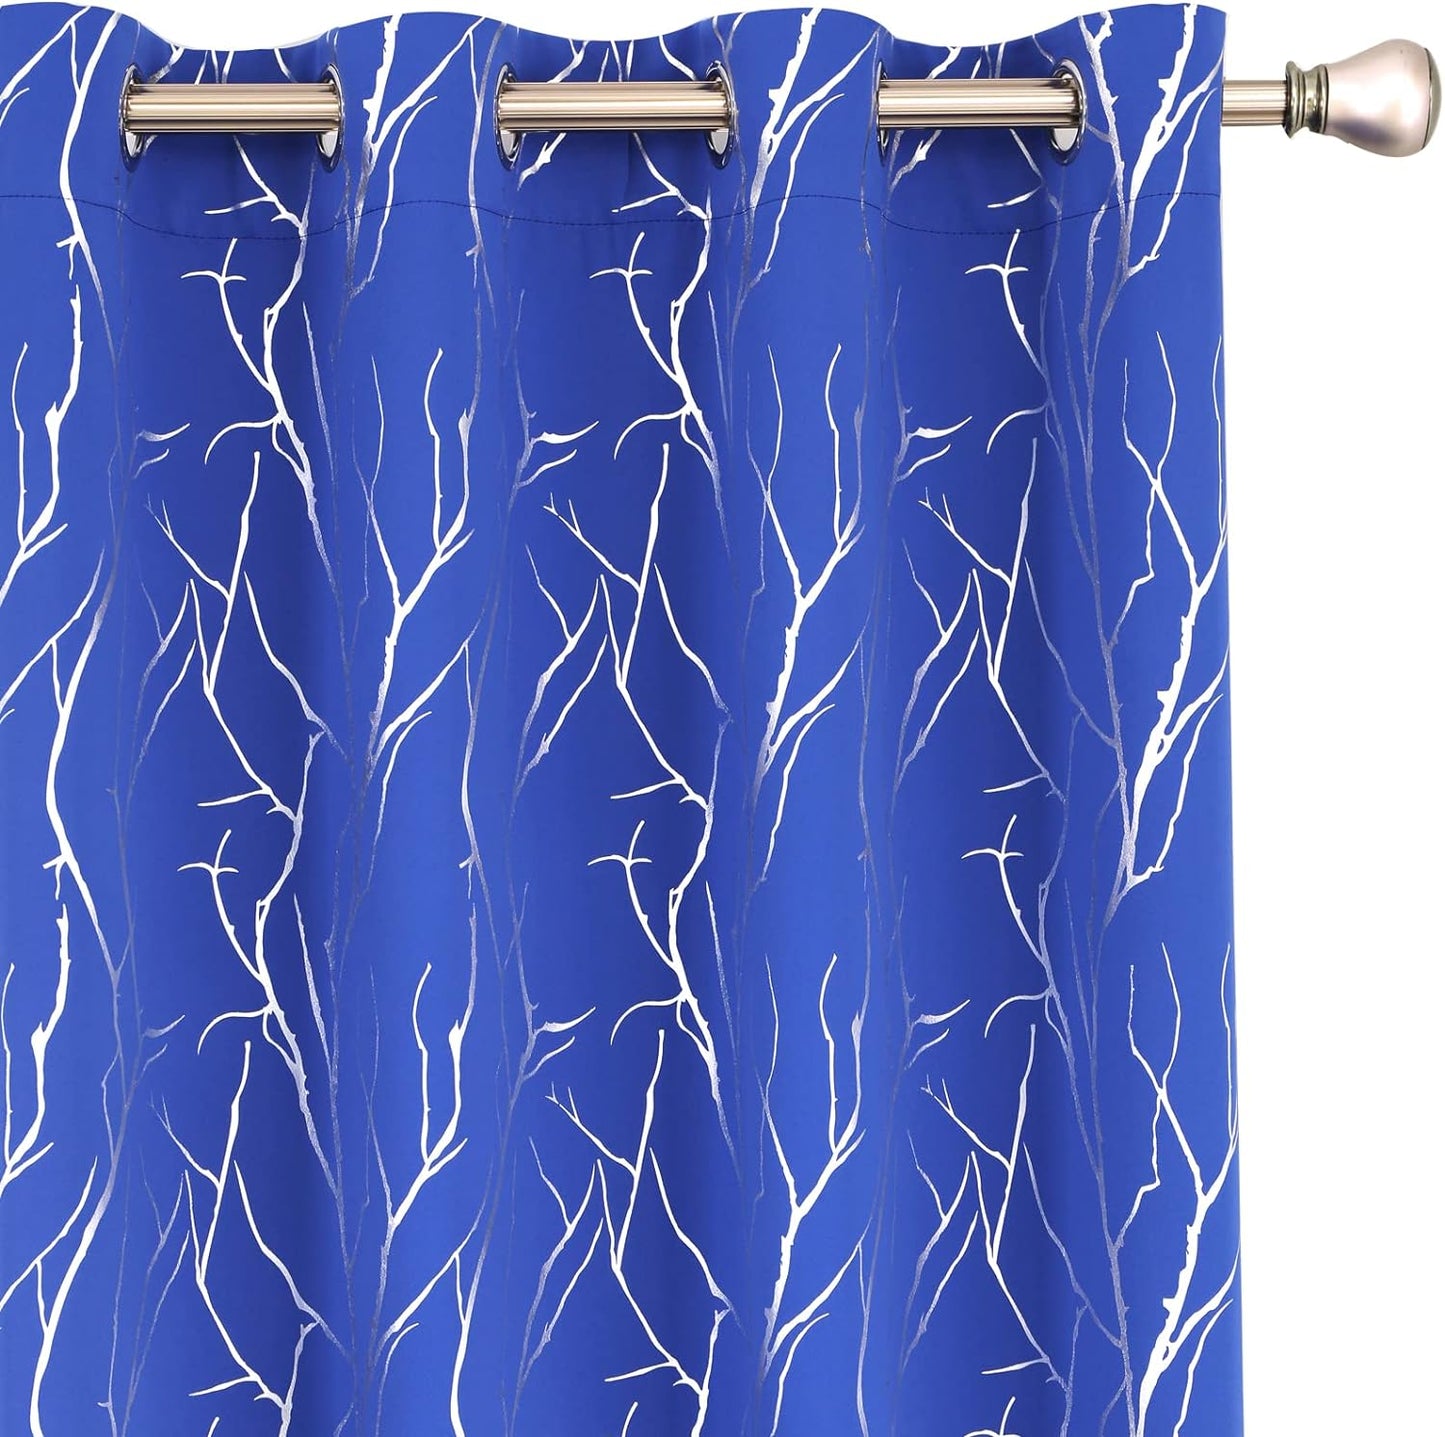 SMILE WEAVER Black Blackout Curtains for Bedroom 72 Inch Long 2 Panels,Room Darkening Curtain with Gold Print Design Noise Reducing Thermal Insulated Window Treatment Drapes for Living Room  SMILE WEAVER Tree Branch-Royal Blue 52Wx96L 